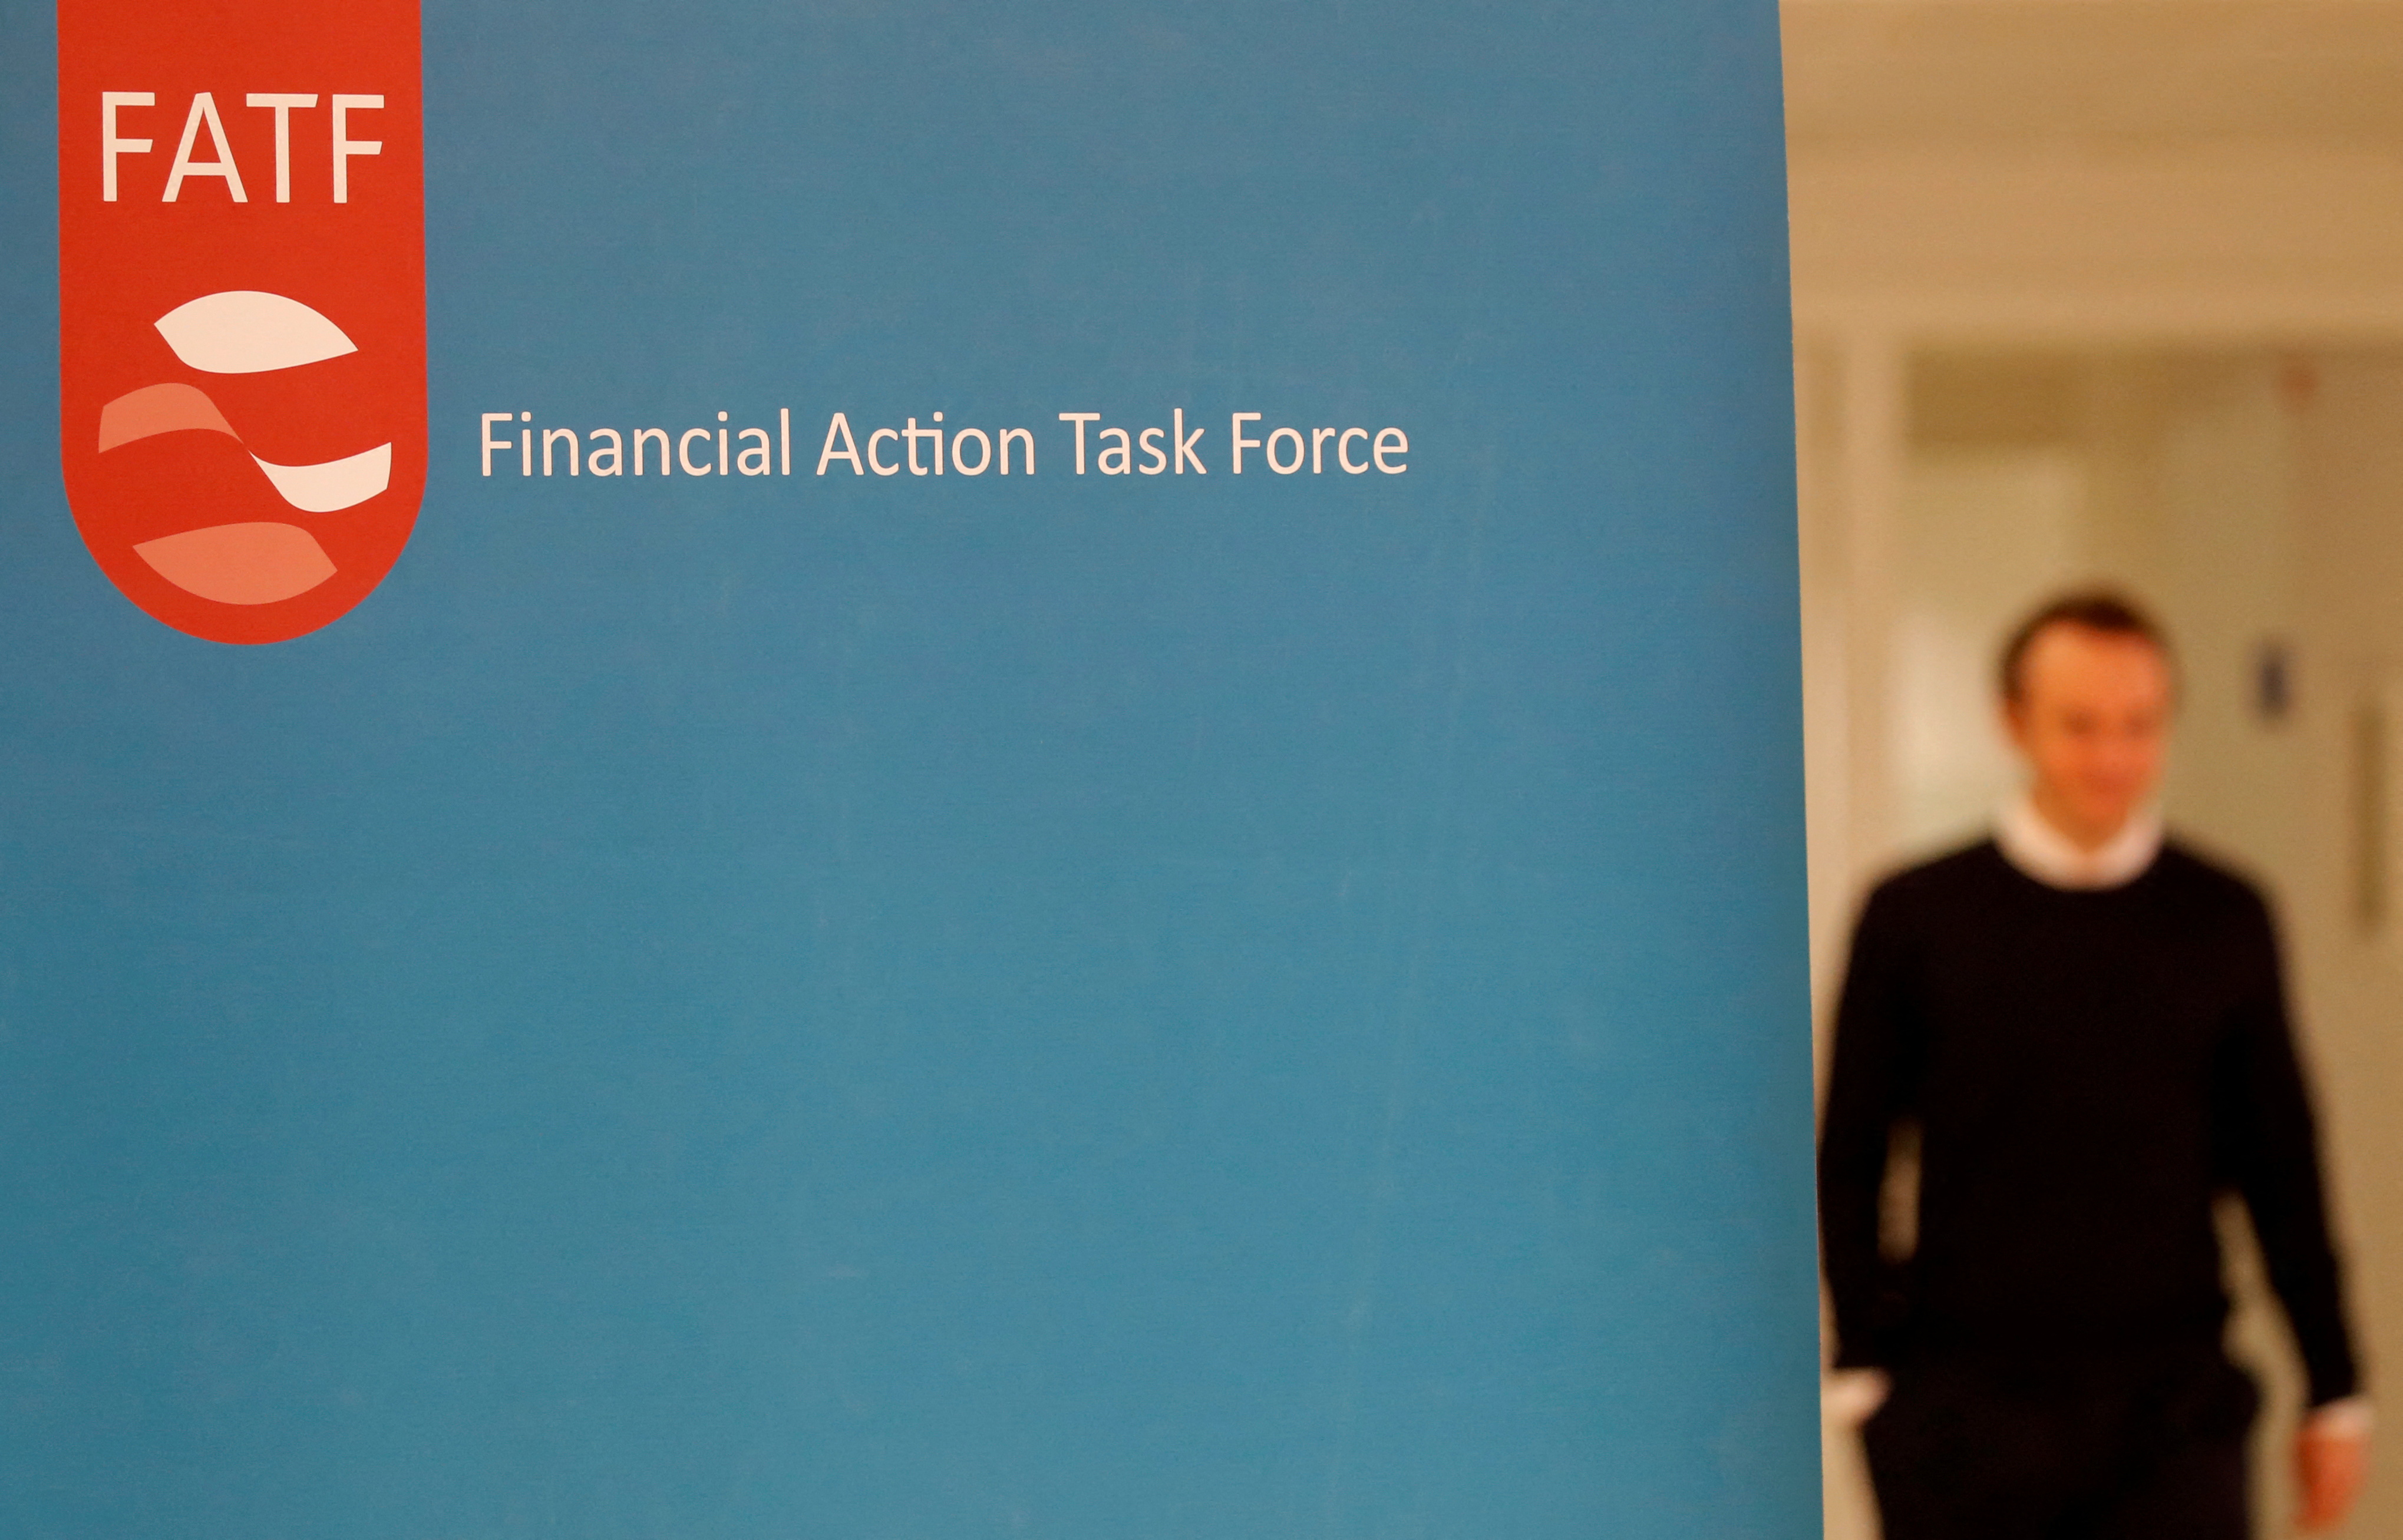 The logo of the FATF (the Financial Action Task Force) is seen during a news conference after a plenary session at the OECD Headquarters in Paris